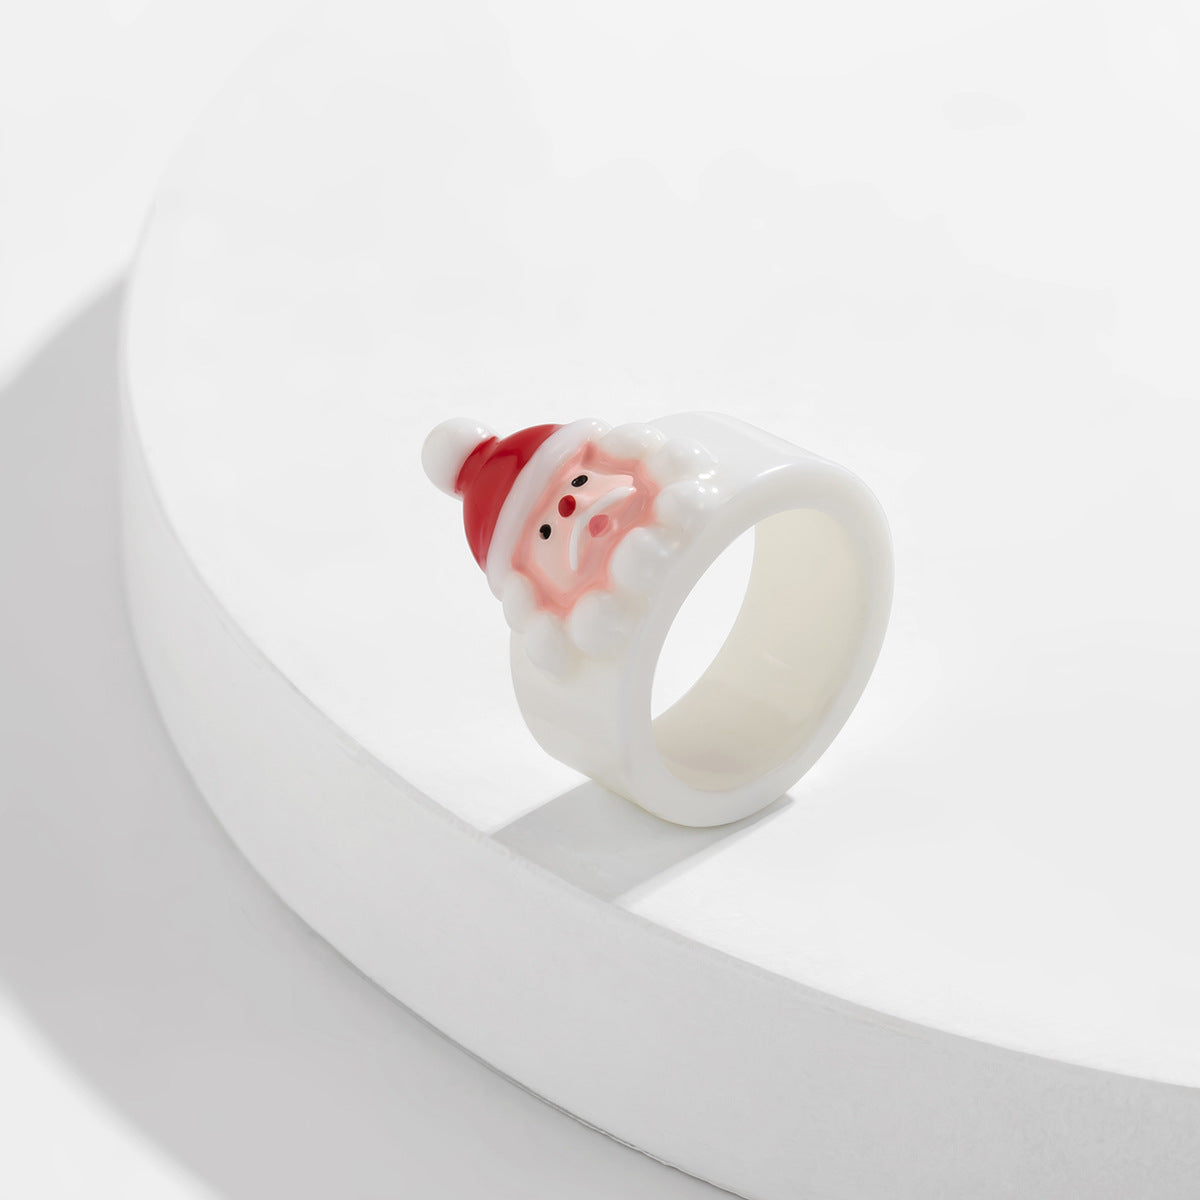 Festive Holiday Jewelry Collection Featuring Santa Claus, Reindeer, and Geometric Bracelets